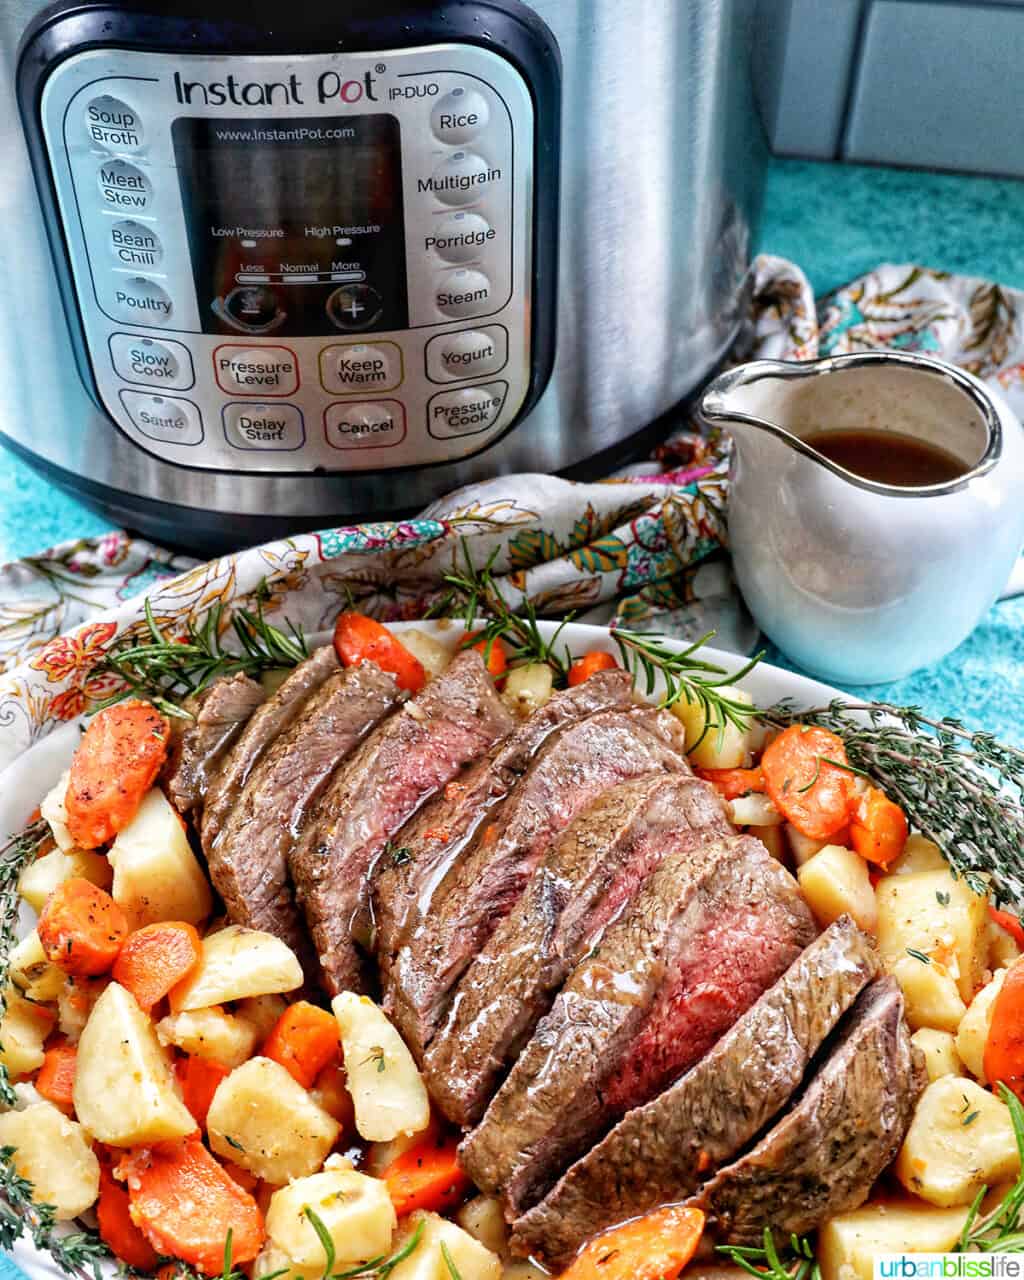 Sliced sirloin tip roast surrounded by carrots, potatoes, and herbs in front of an Instant Pot with a side of gravy.